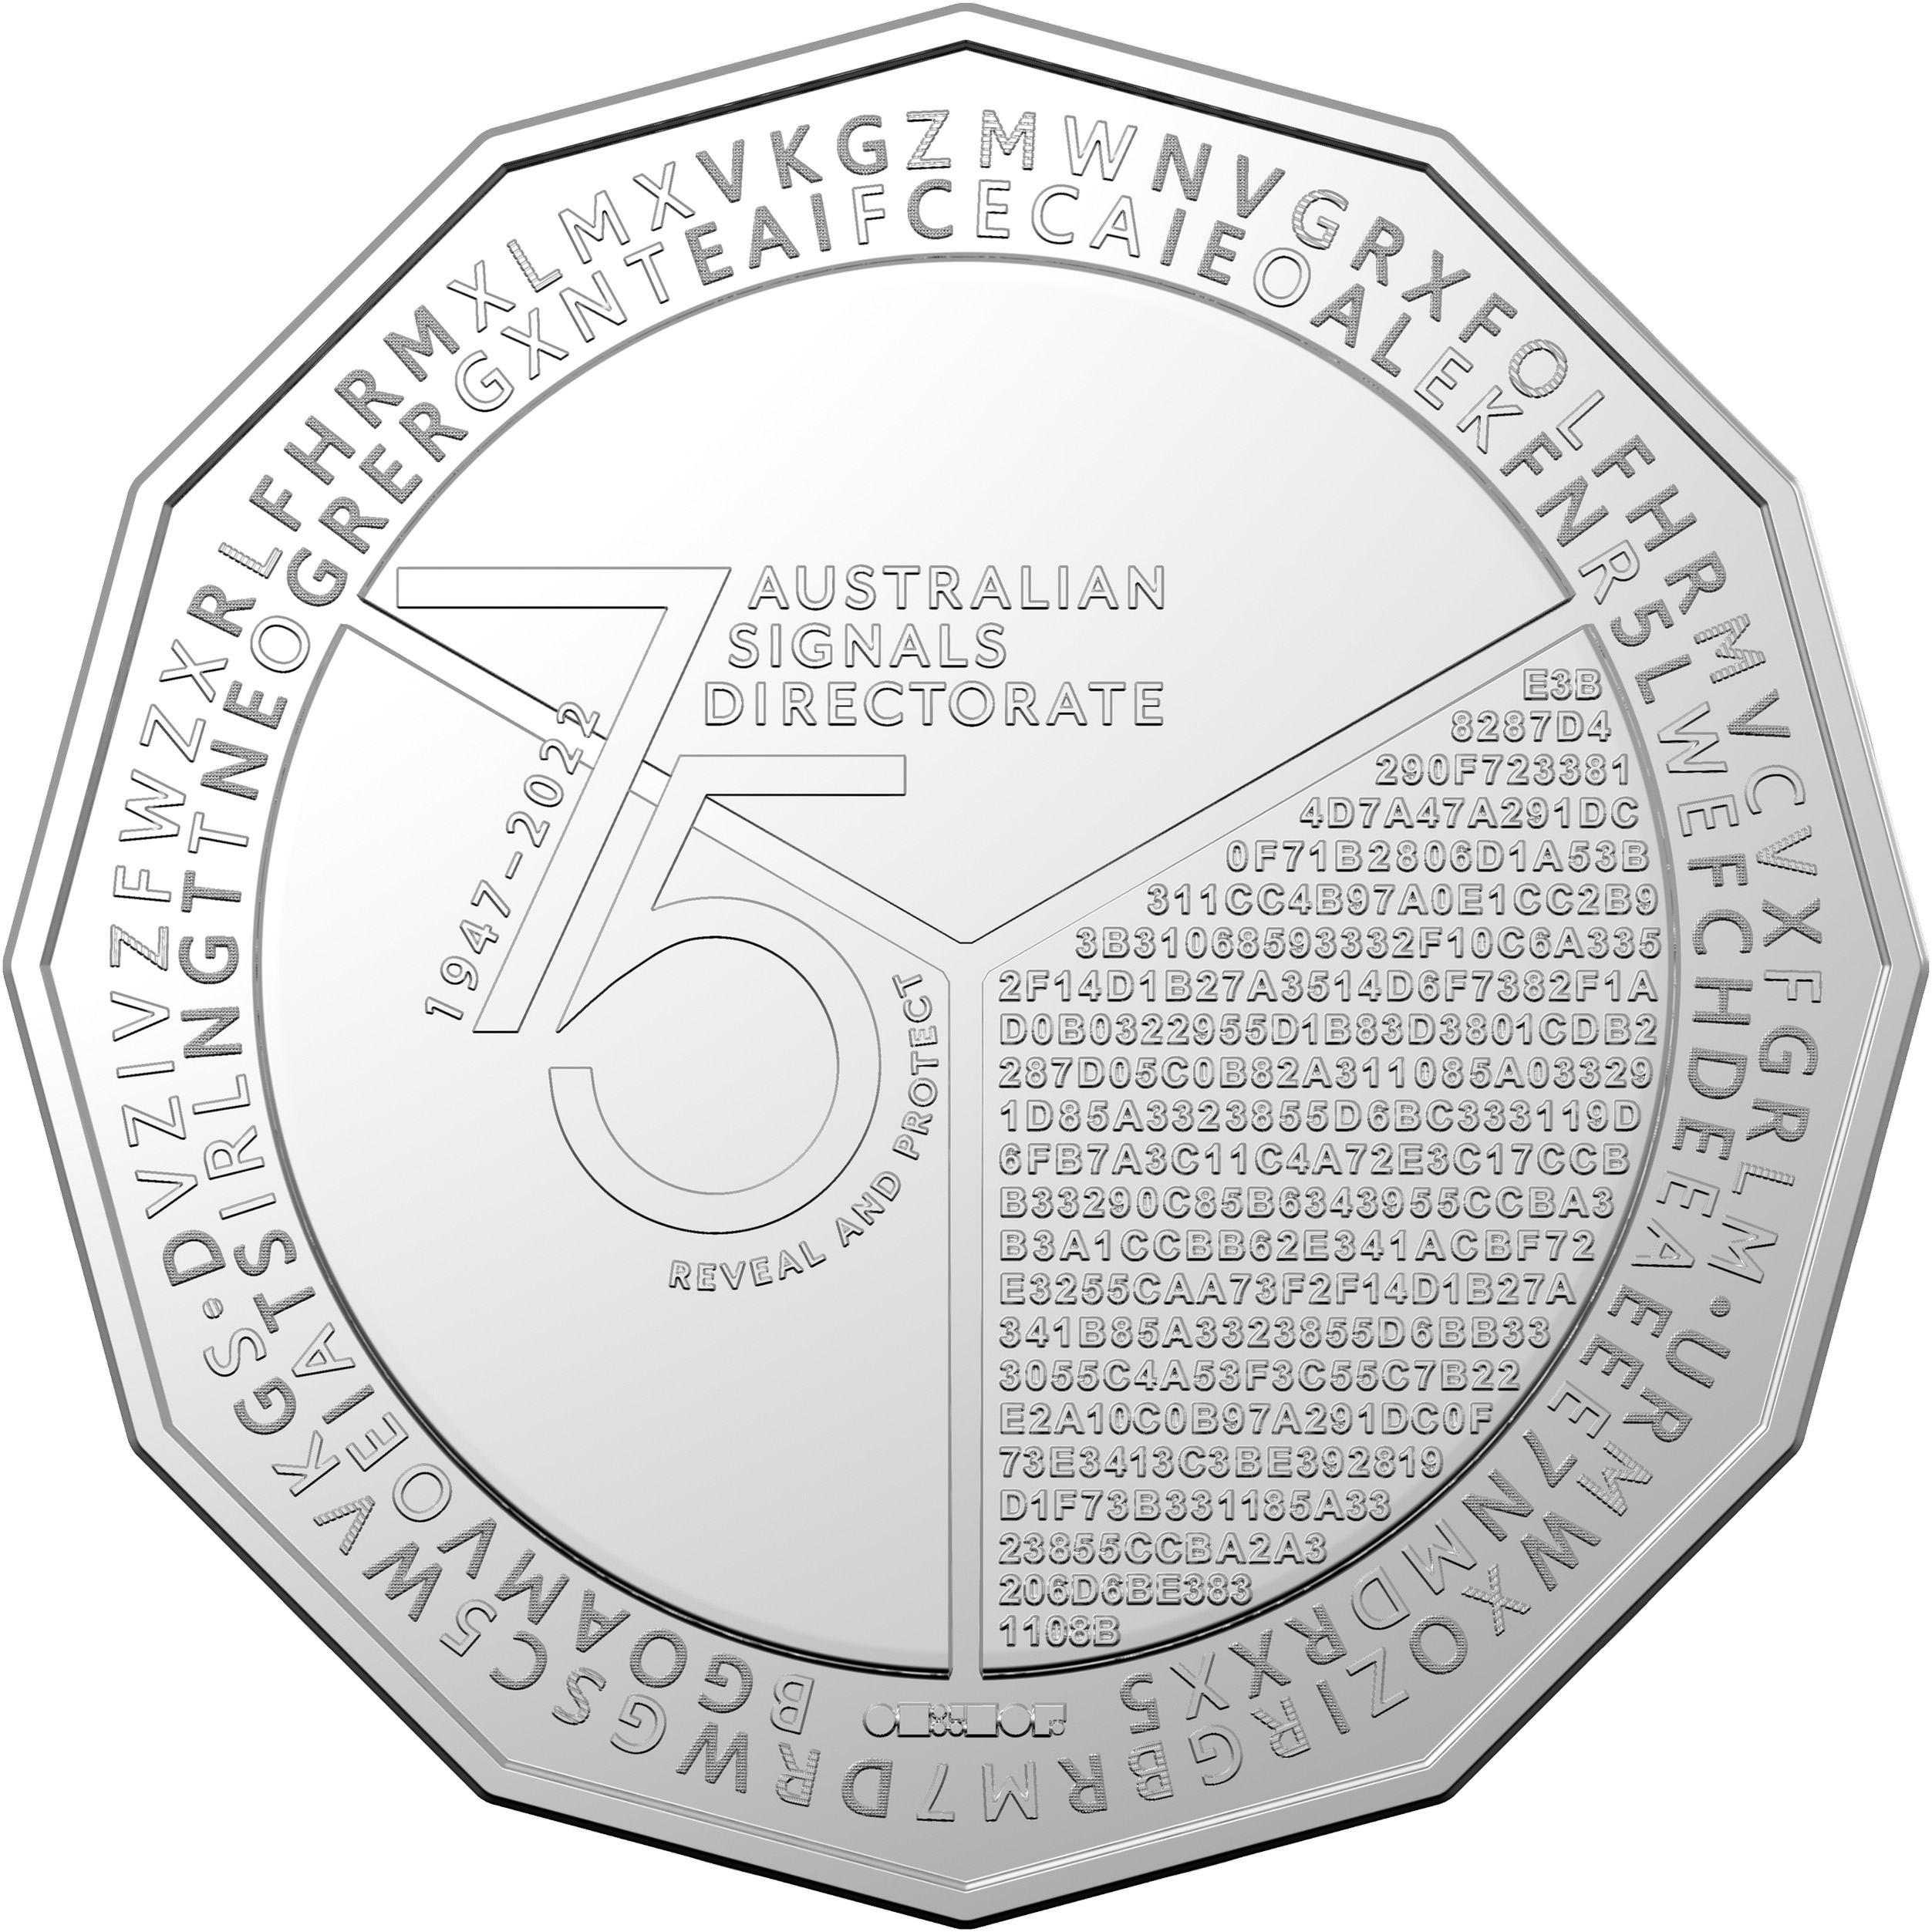 The front of the Australian Signals Directorate 75th anniversary 50 cent coin.